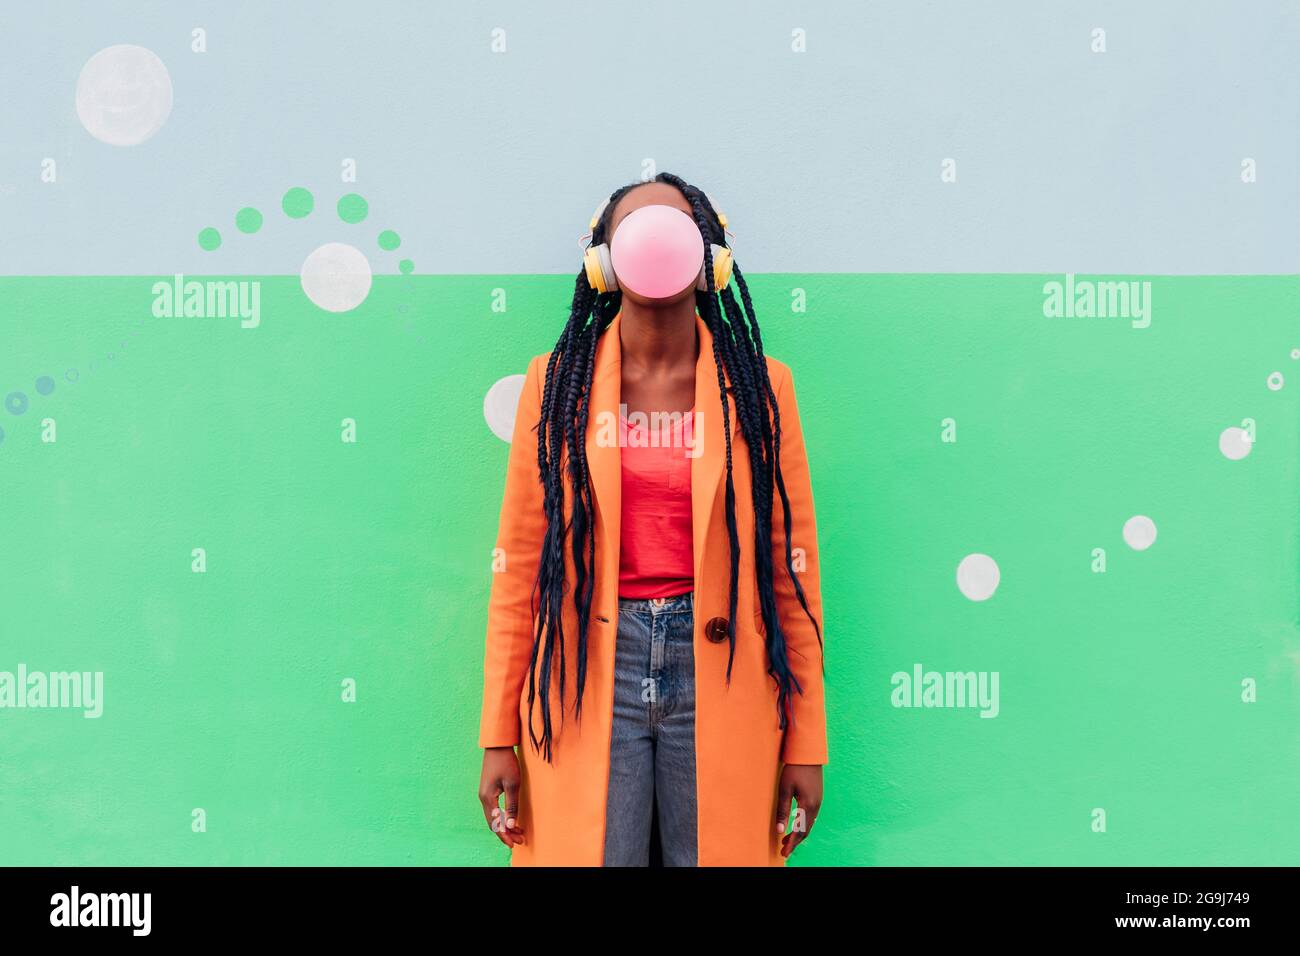 Italy, Milan, Stylish woman with headphones blowing gum against wall Stock Photo